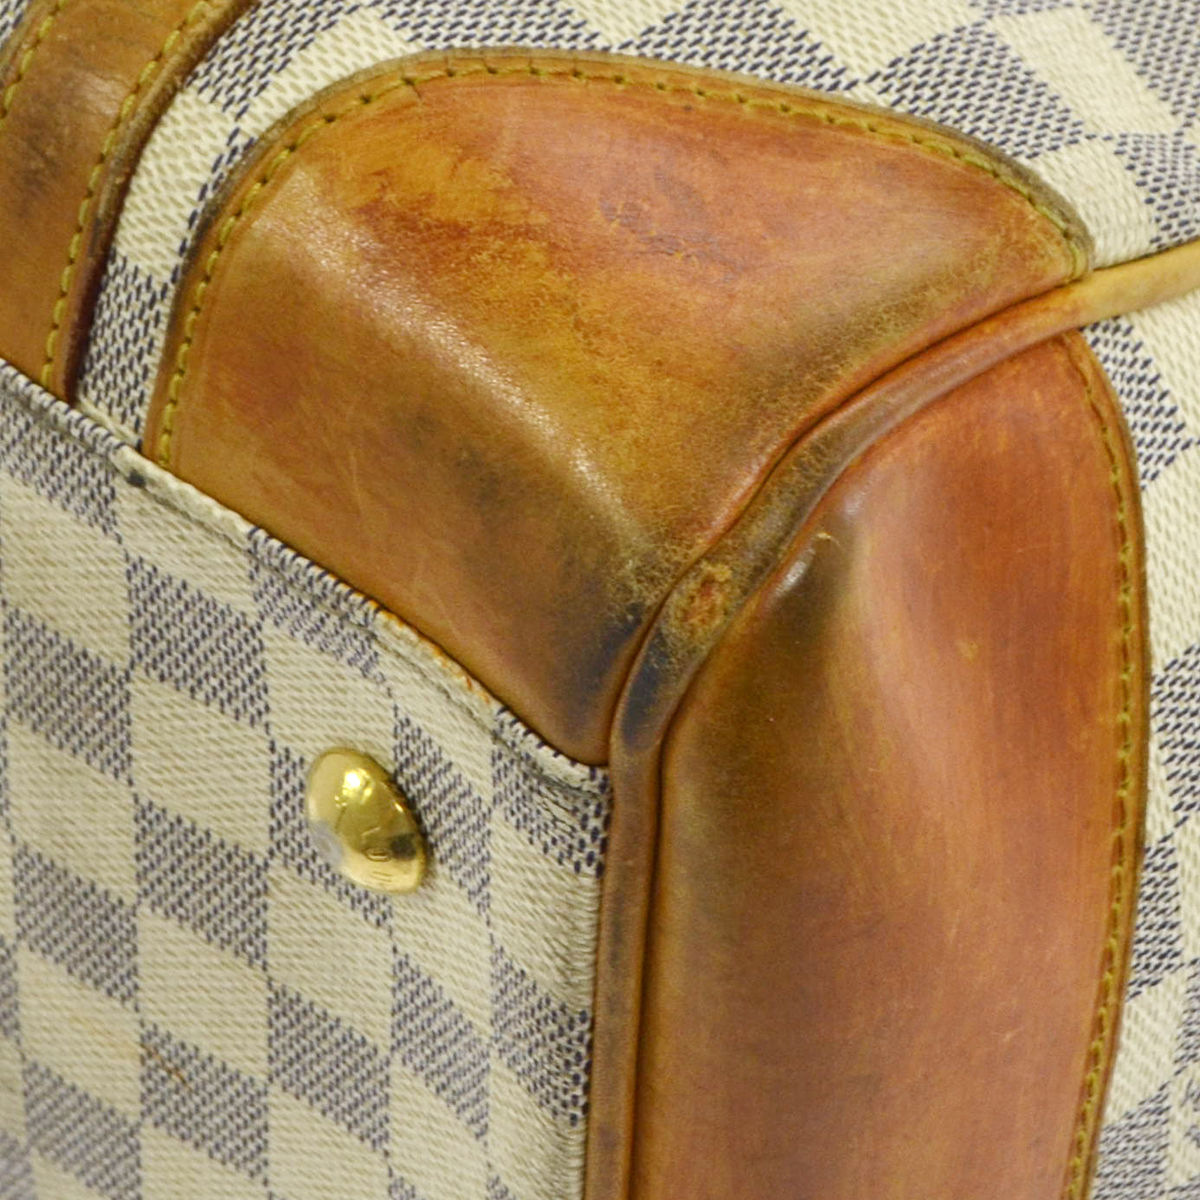 Louis Vuitton - with Vachetta leather trim, how to clean it and protect it  well?